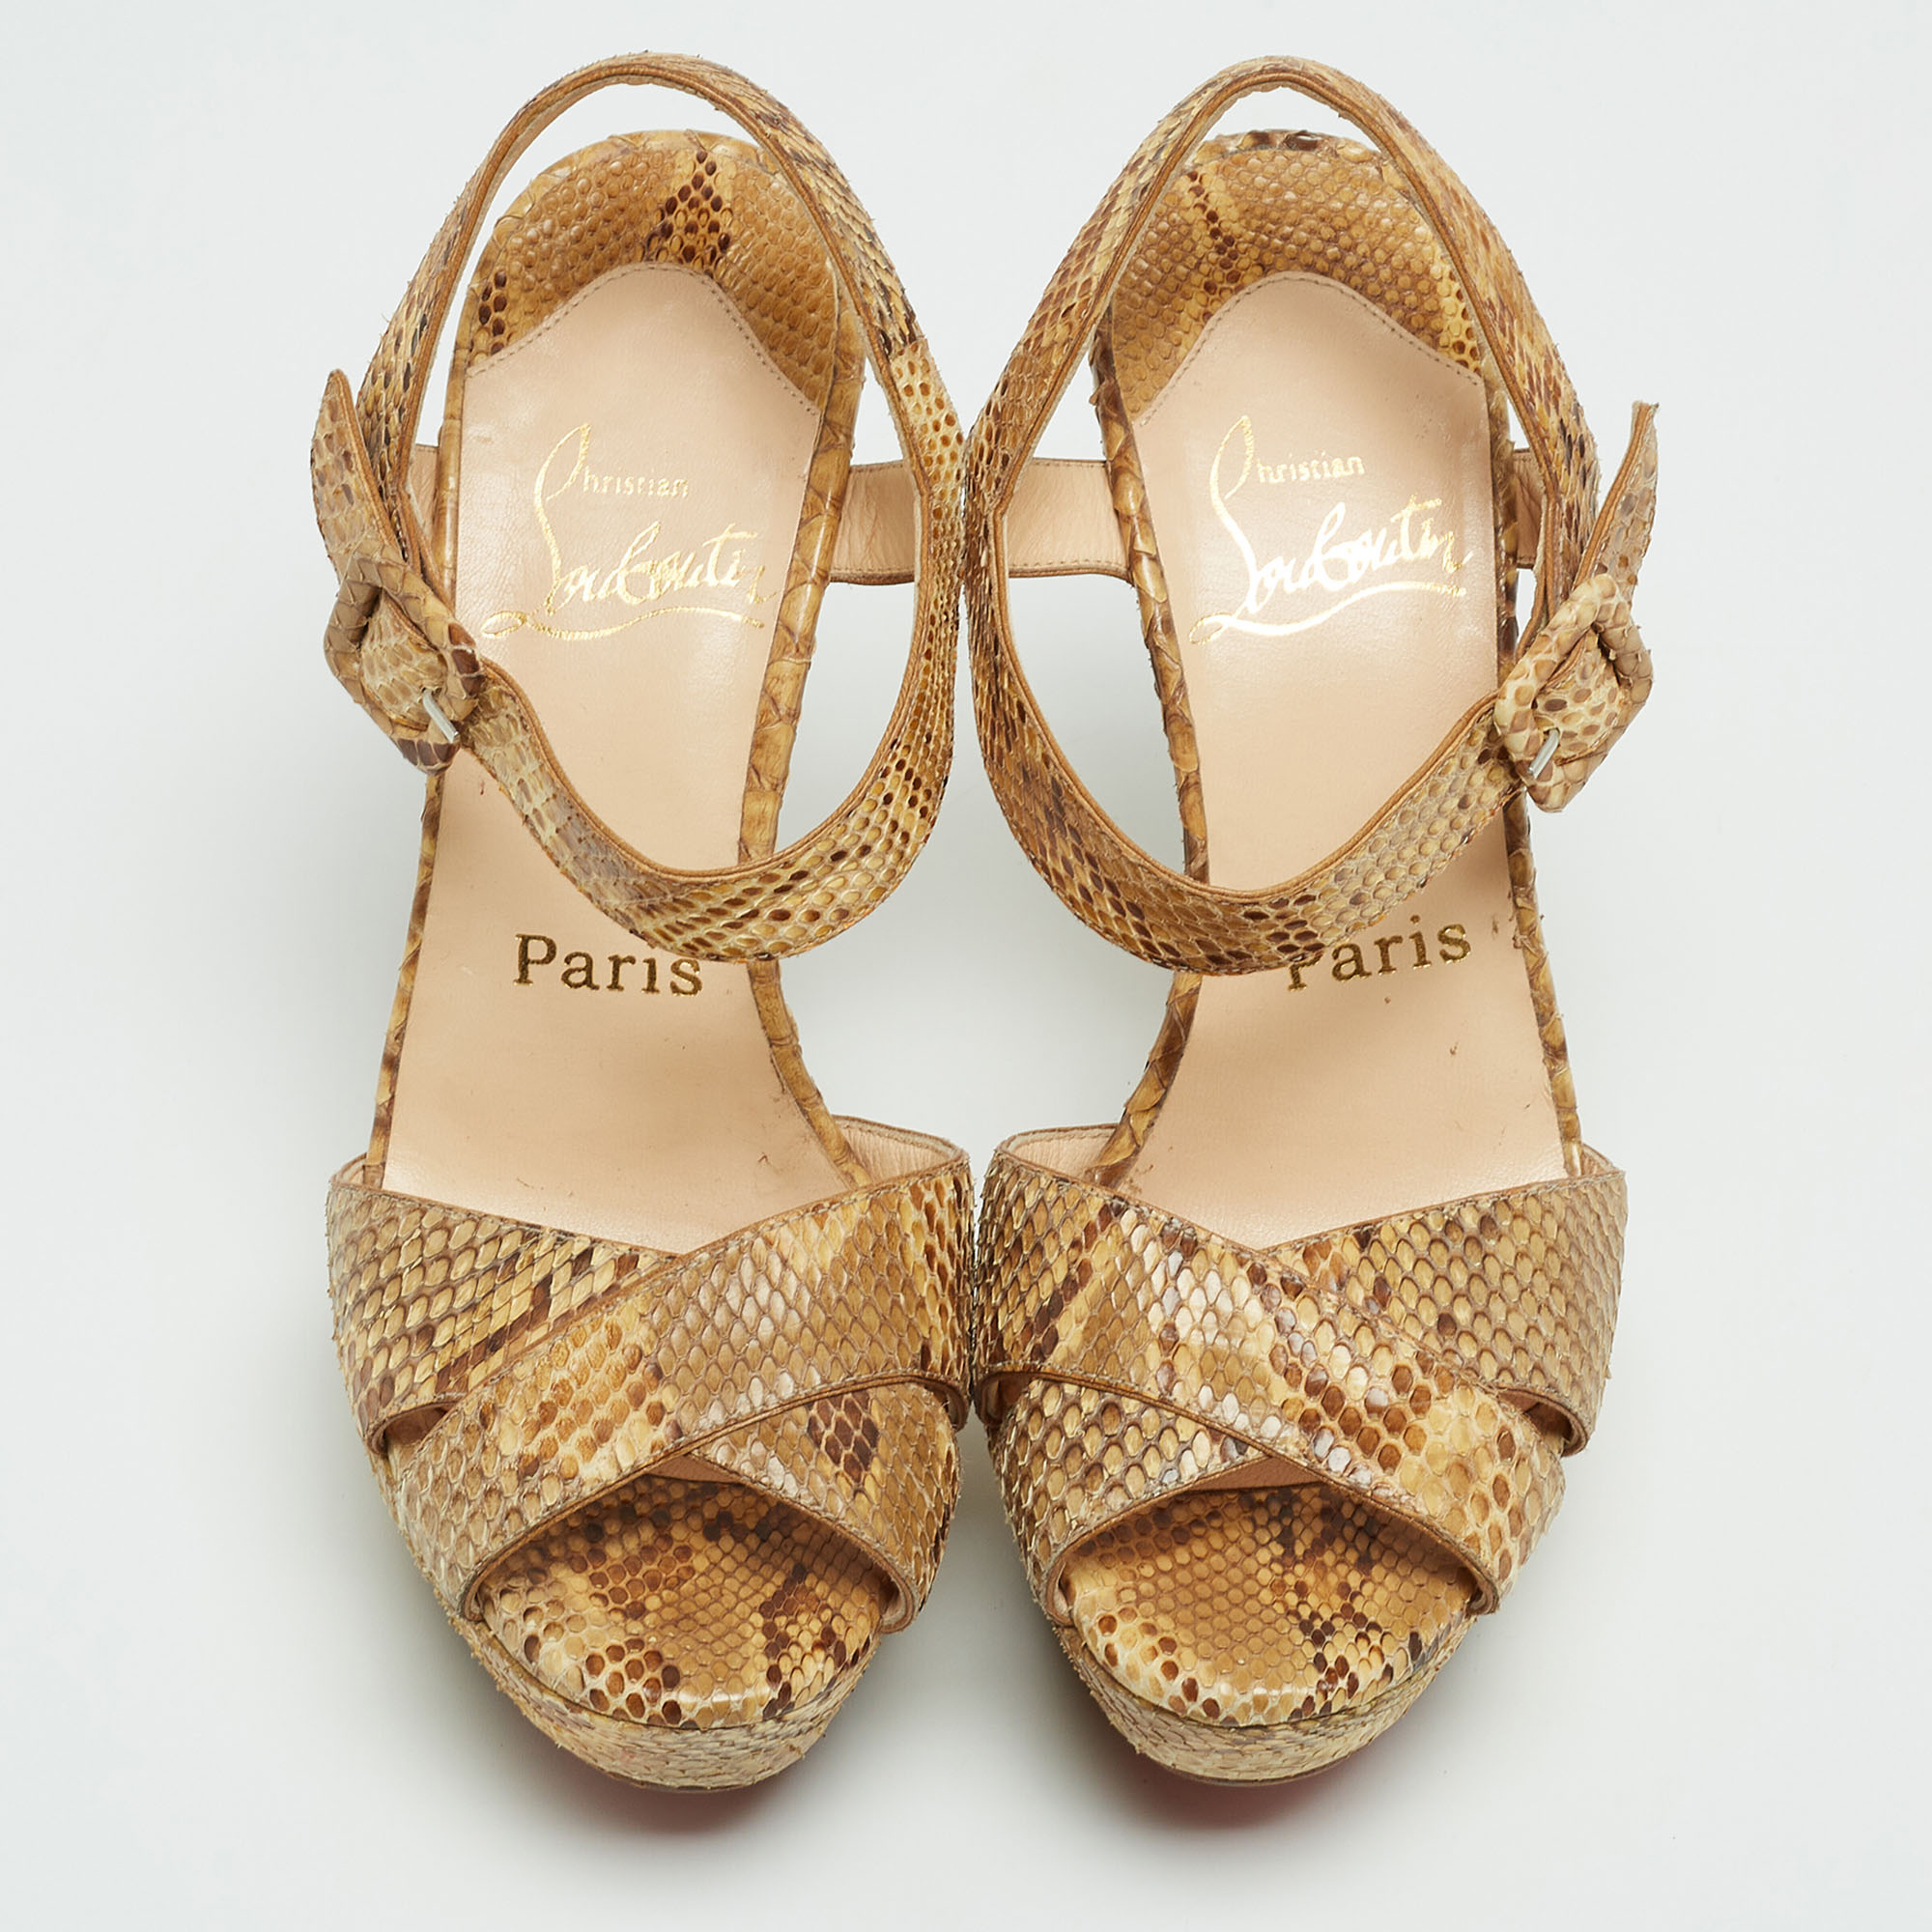 Christian Louboutin Beige Python Leather  Ankle Strap Sandals Size 35